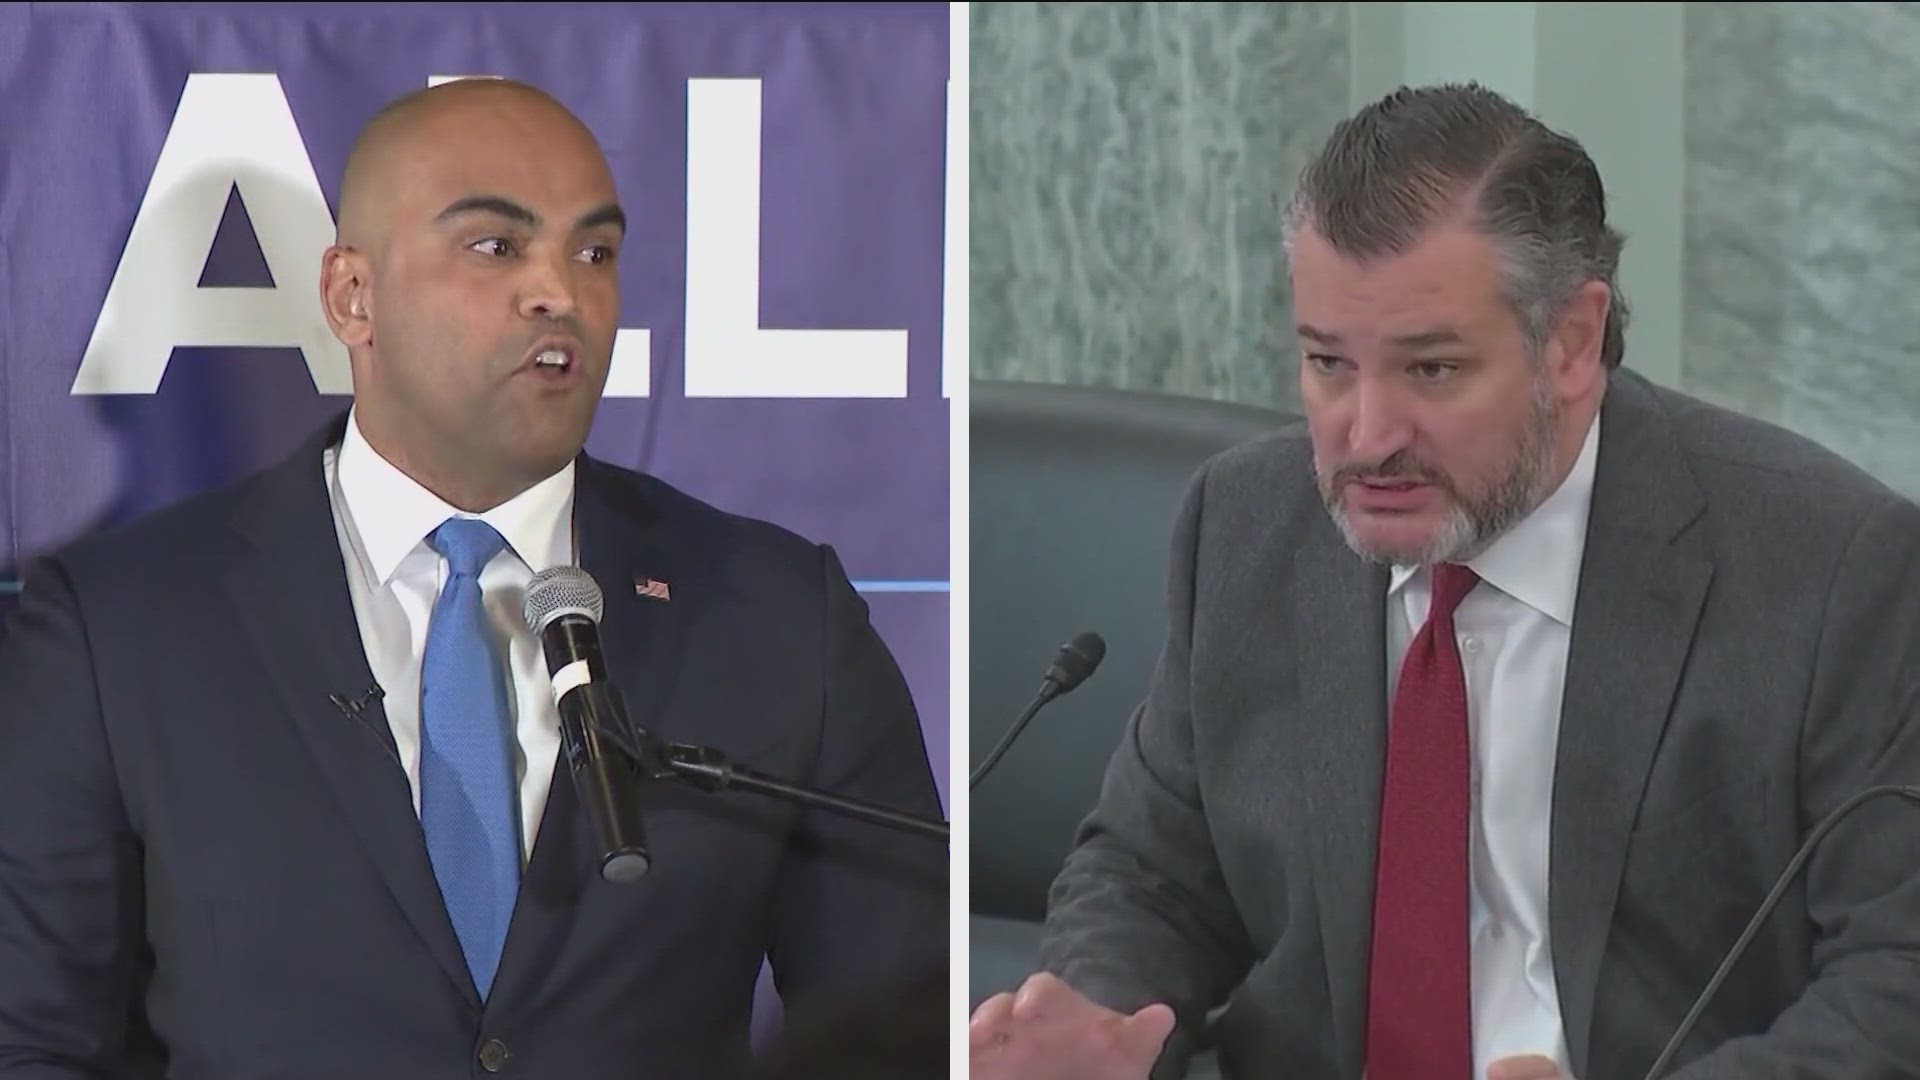 Cruz will face Democratic nominee Colin Allred in the race for U.S. Senate later this year.